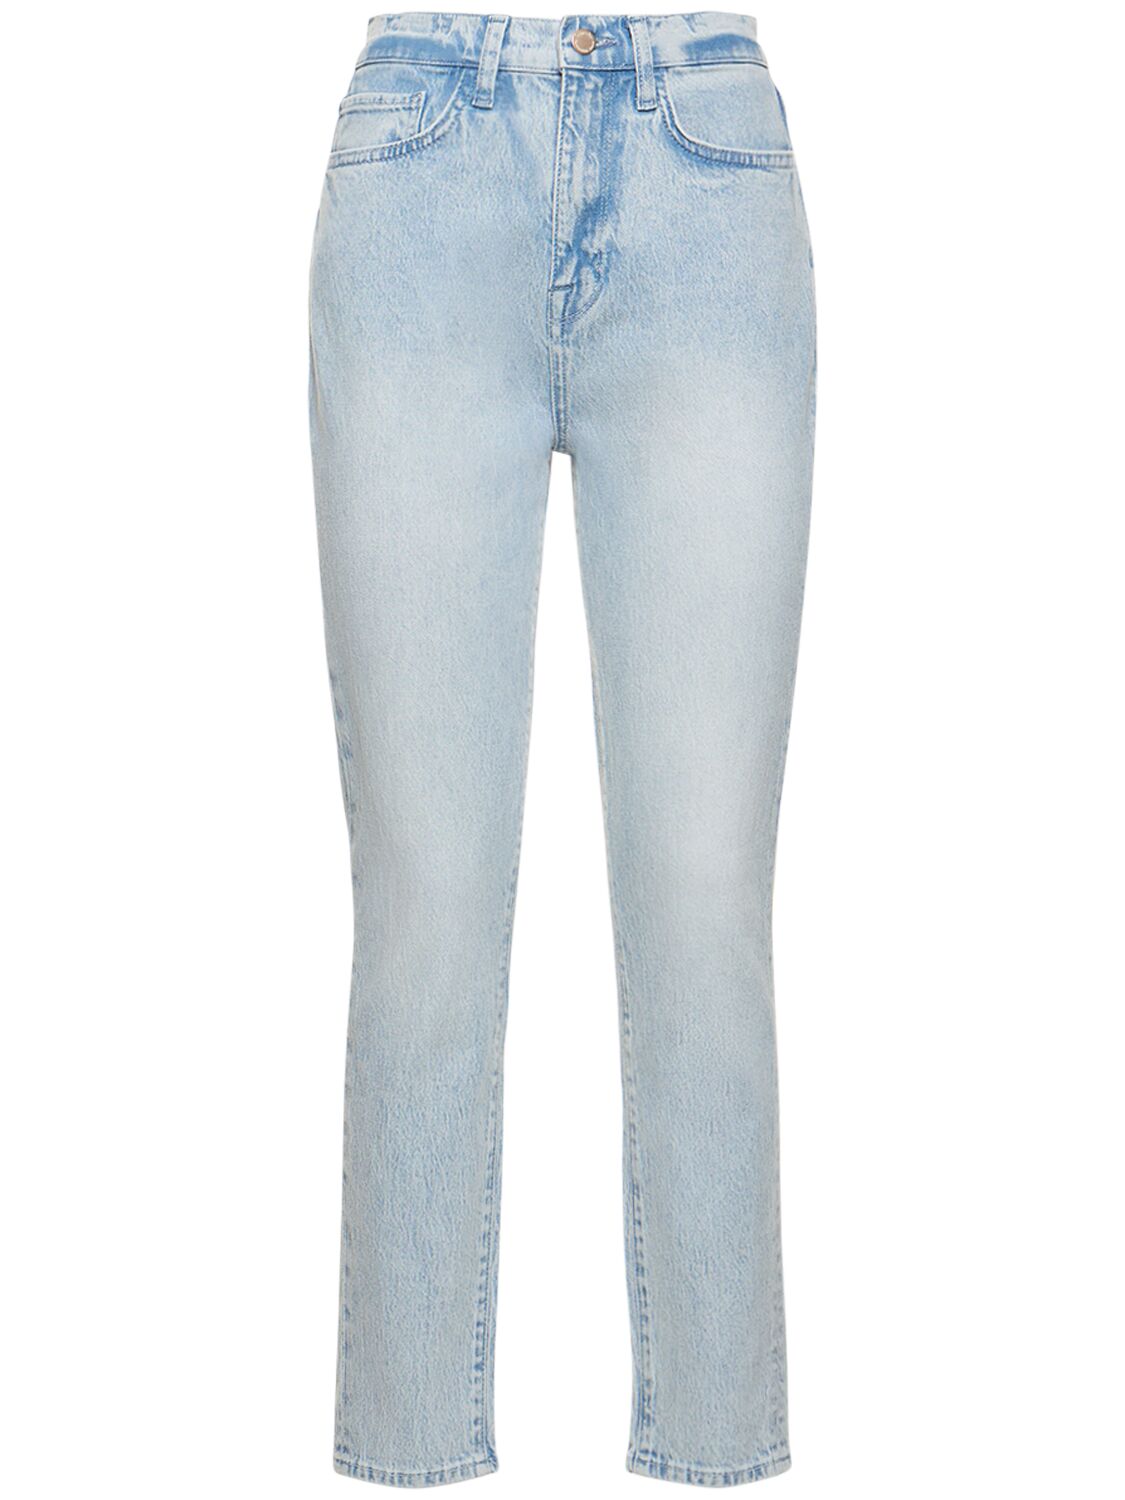 Image of Ms. Ava High-rise Retro Skinny Jeans